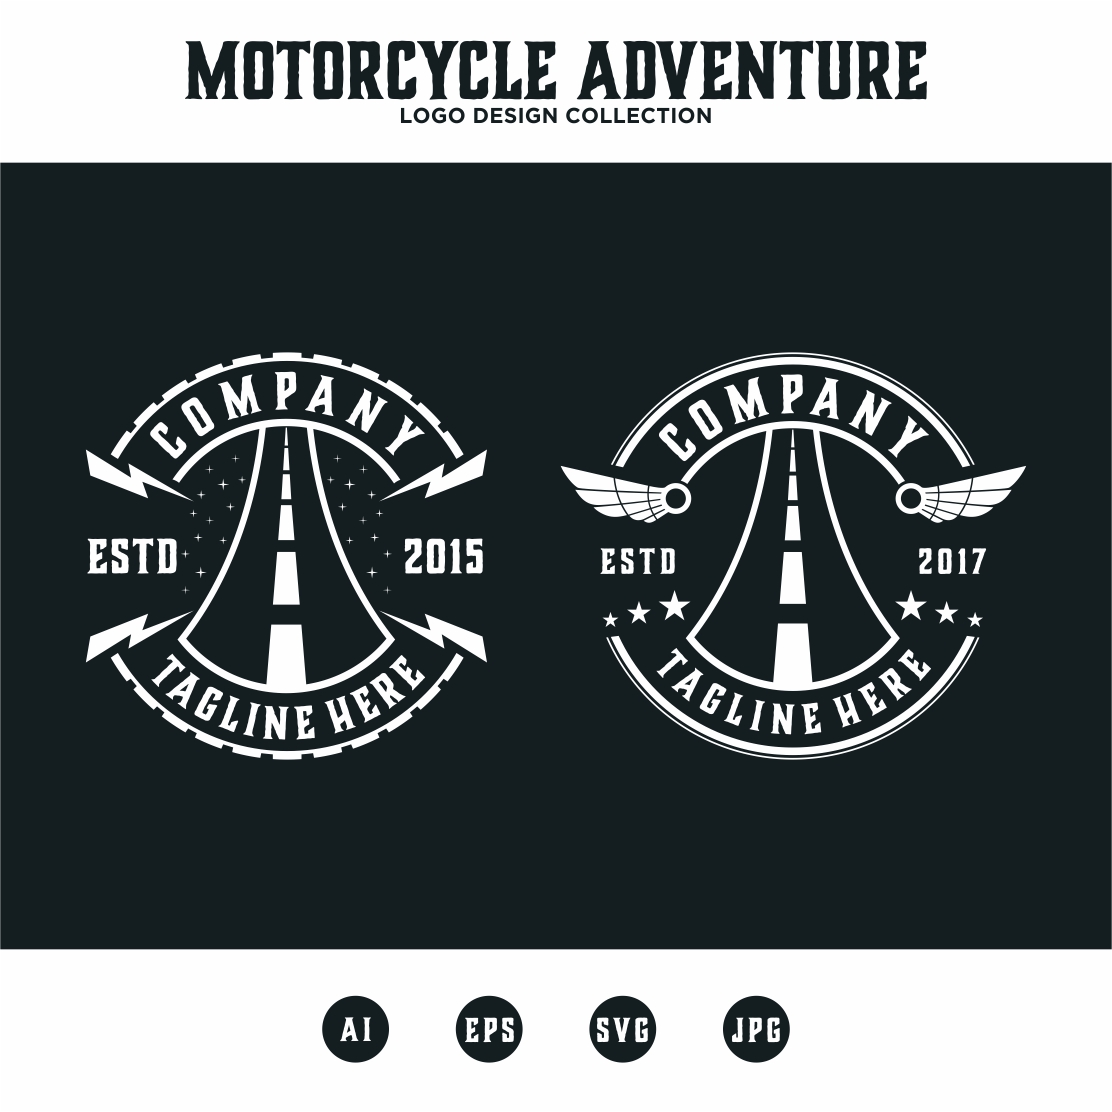 Motorcycle adventure emblem logo Design Collection - only 5$ cover image.